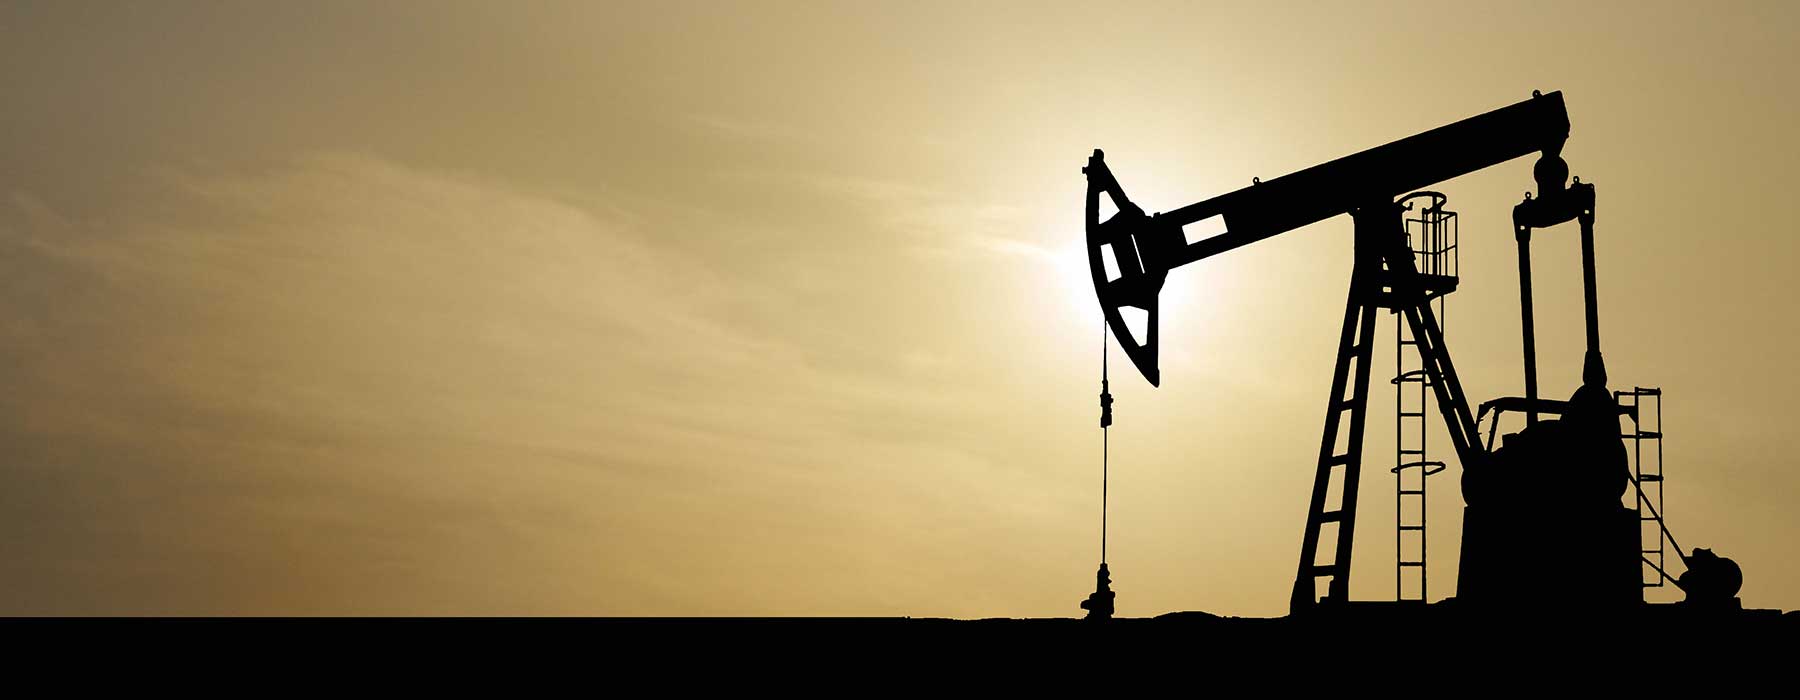 oilfield pump jack in front of sunset